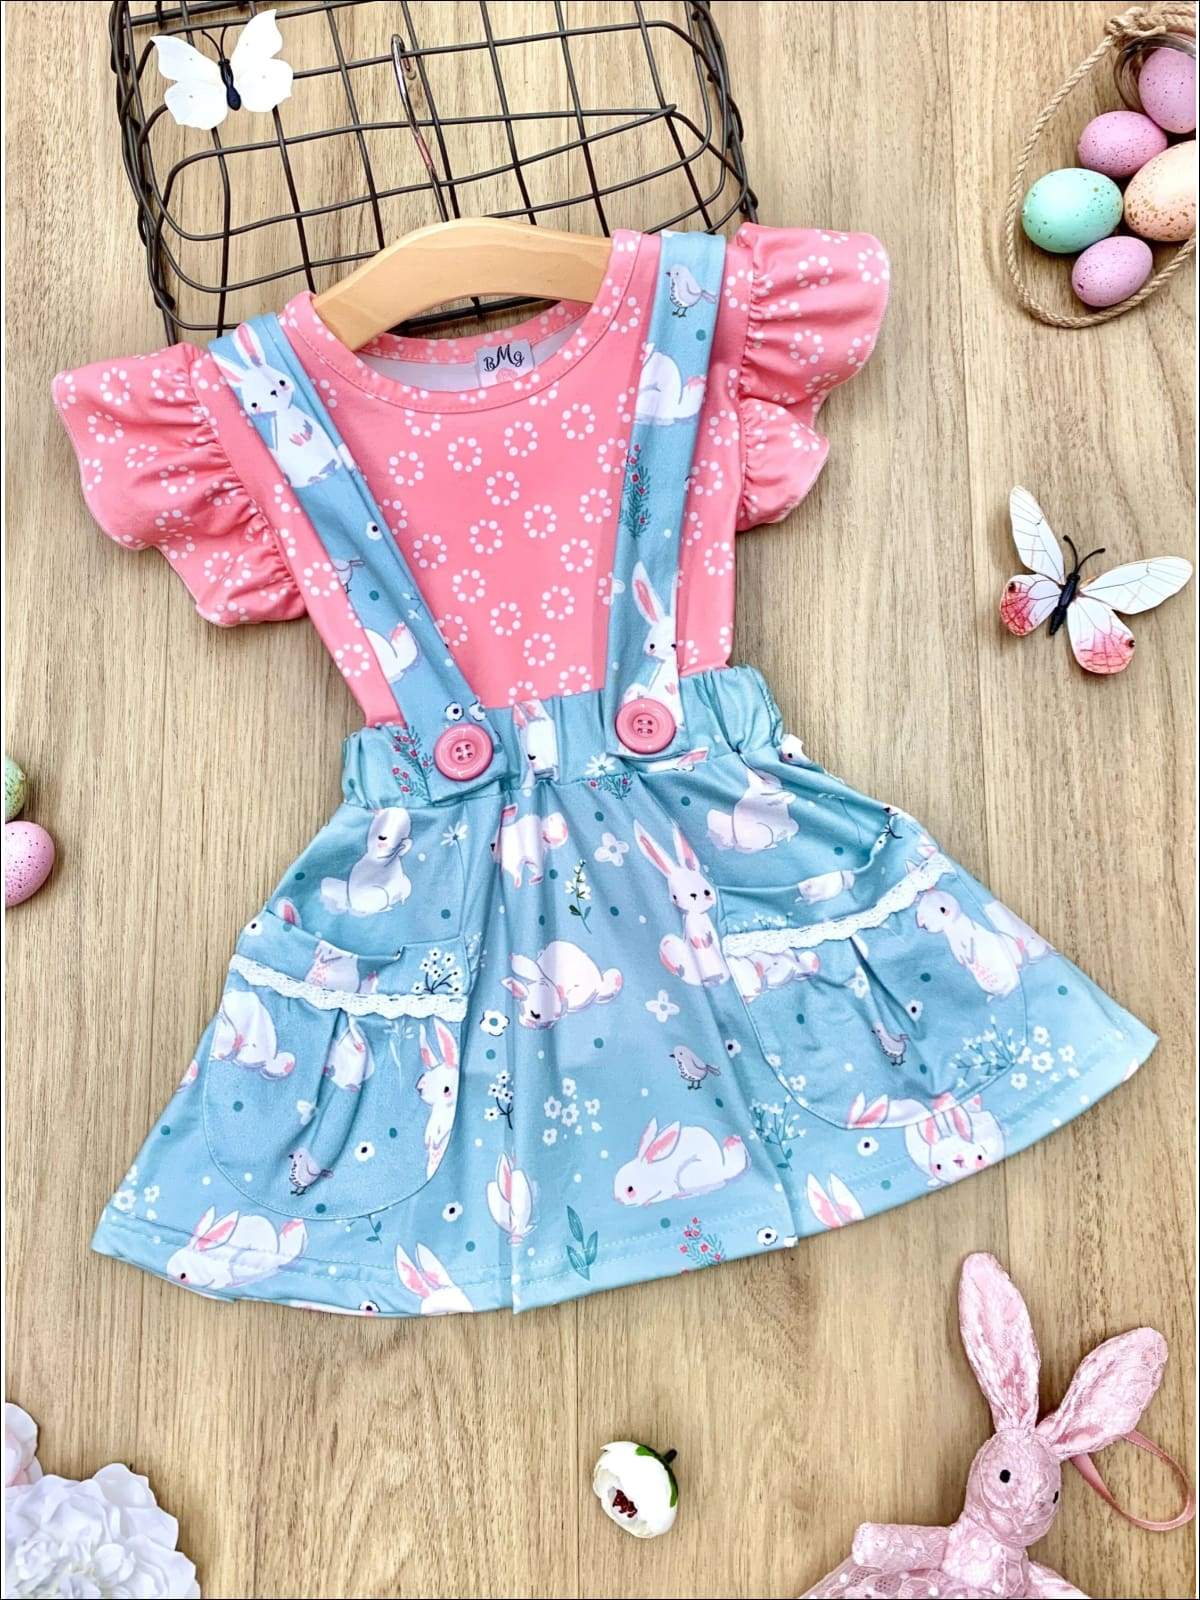 Causal Easter Outfits | Girls Ruffle Top & Bunny Pocket Overall Skirt